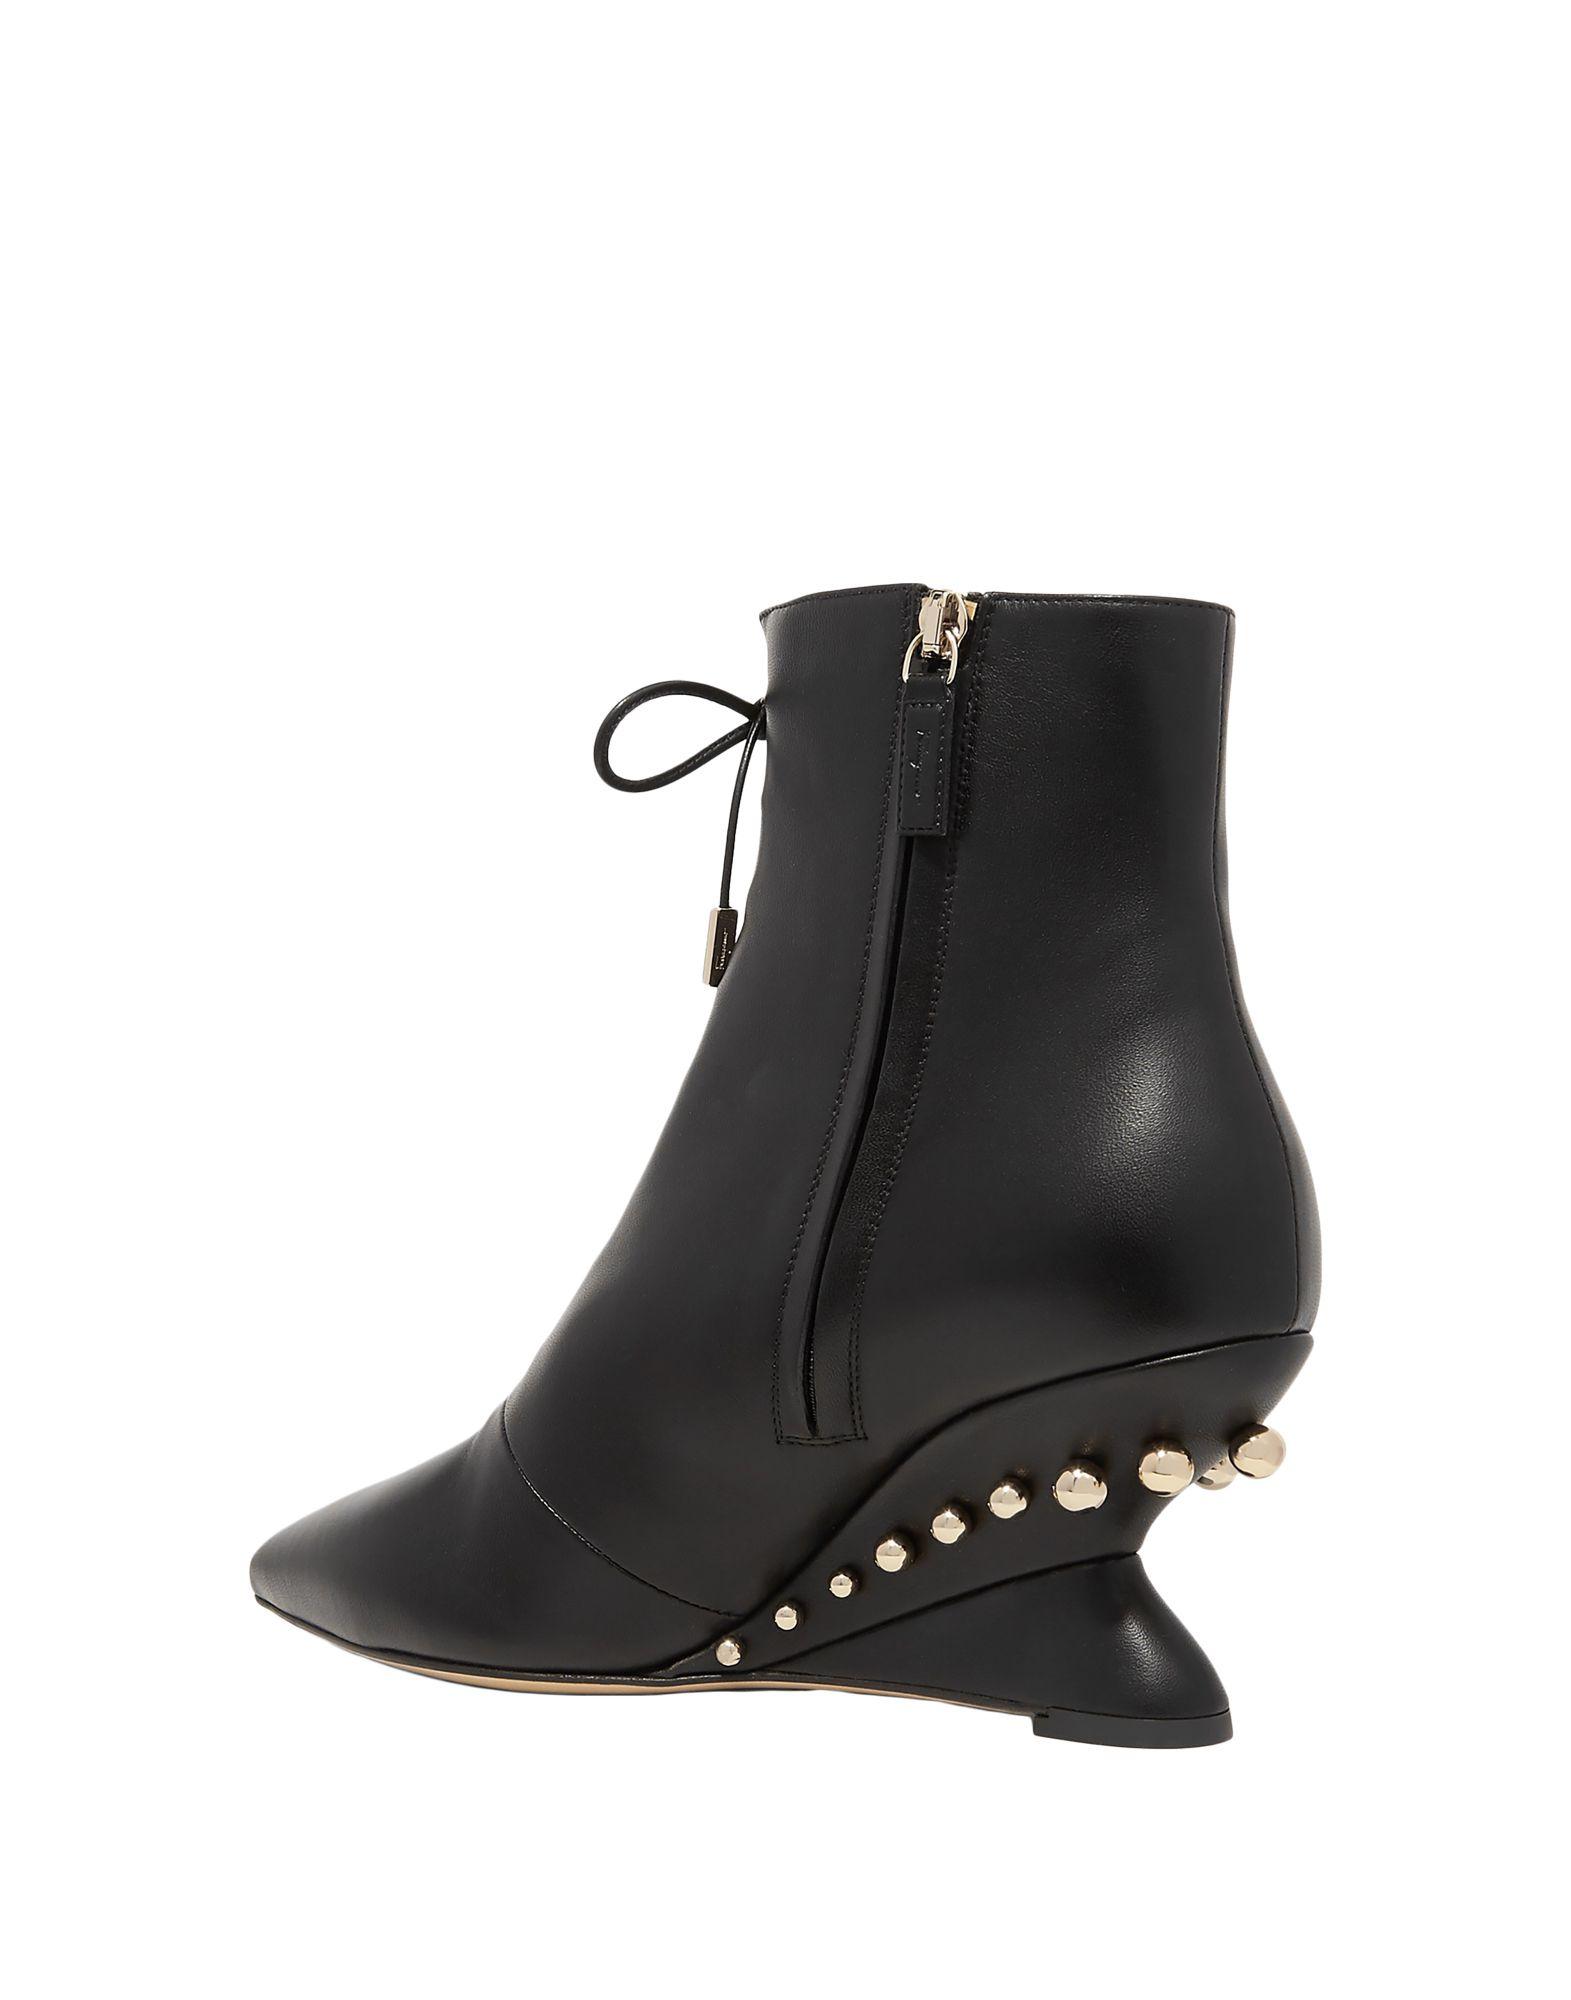 Ferragamo Leather Ankle Boots in Black - Lyst